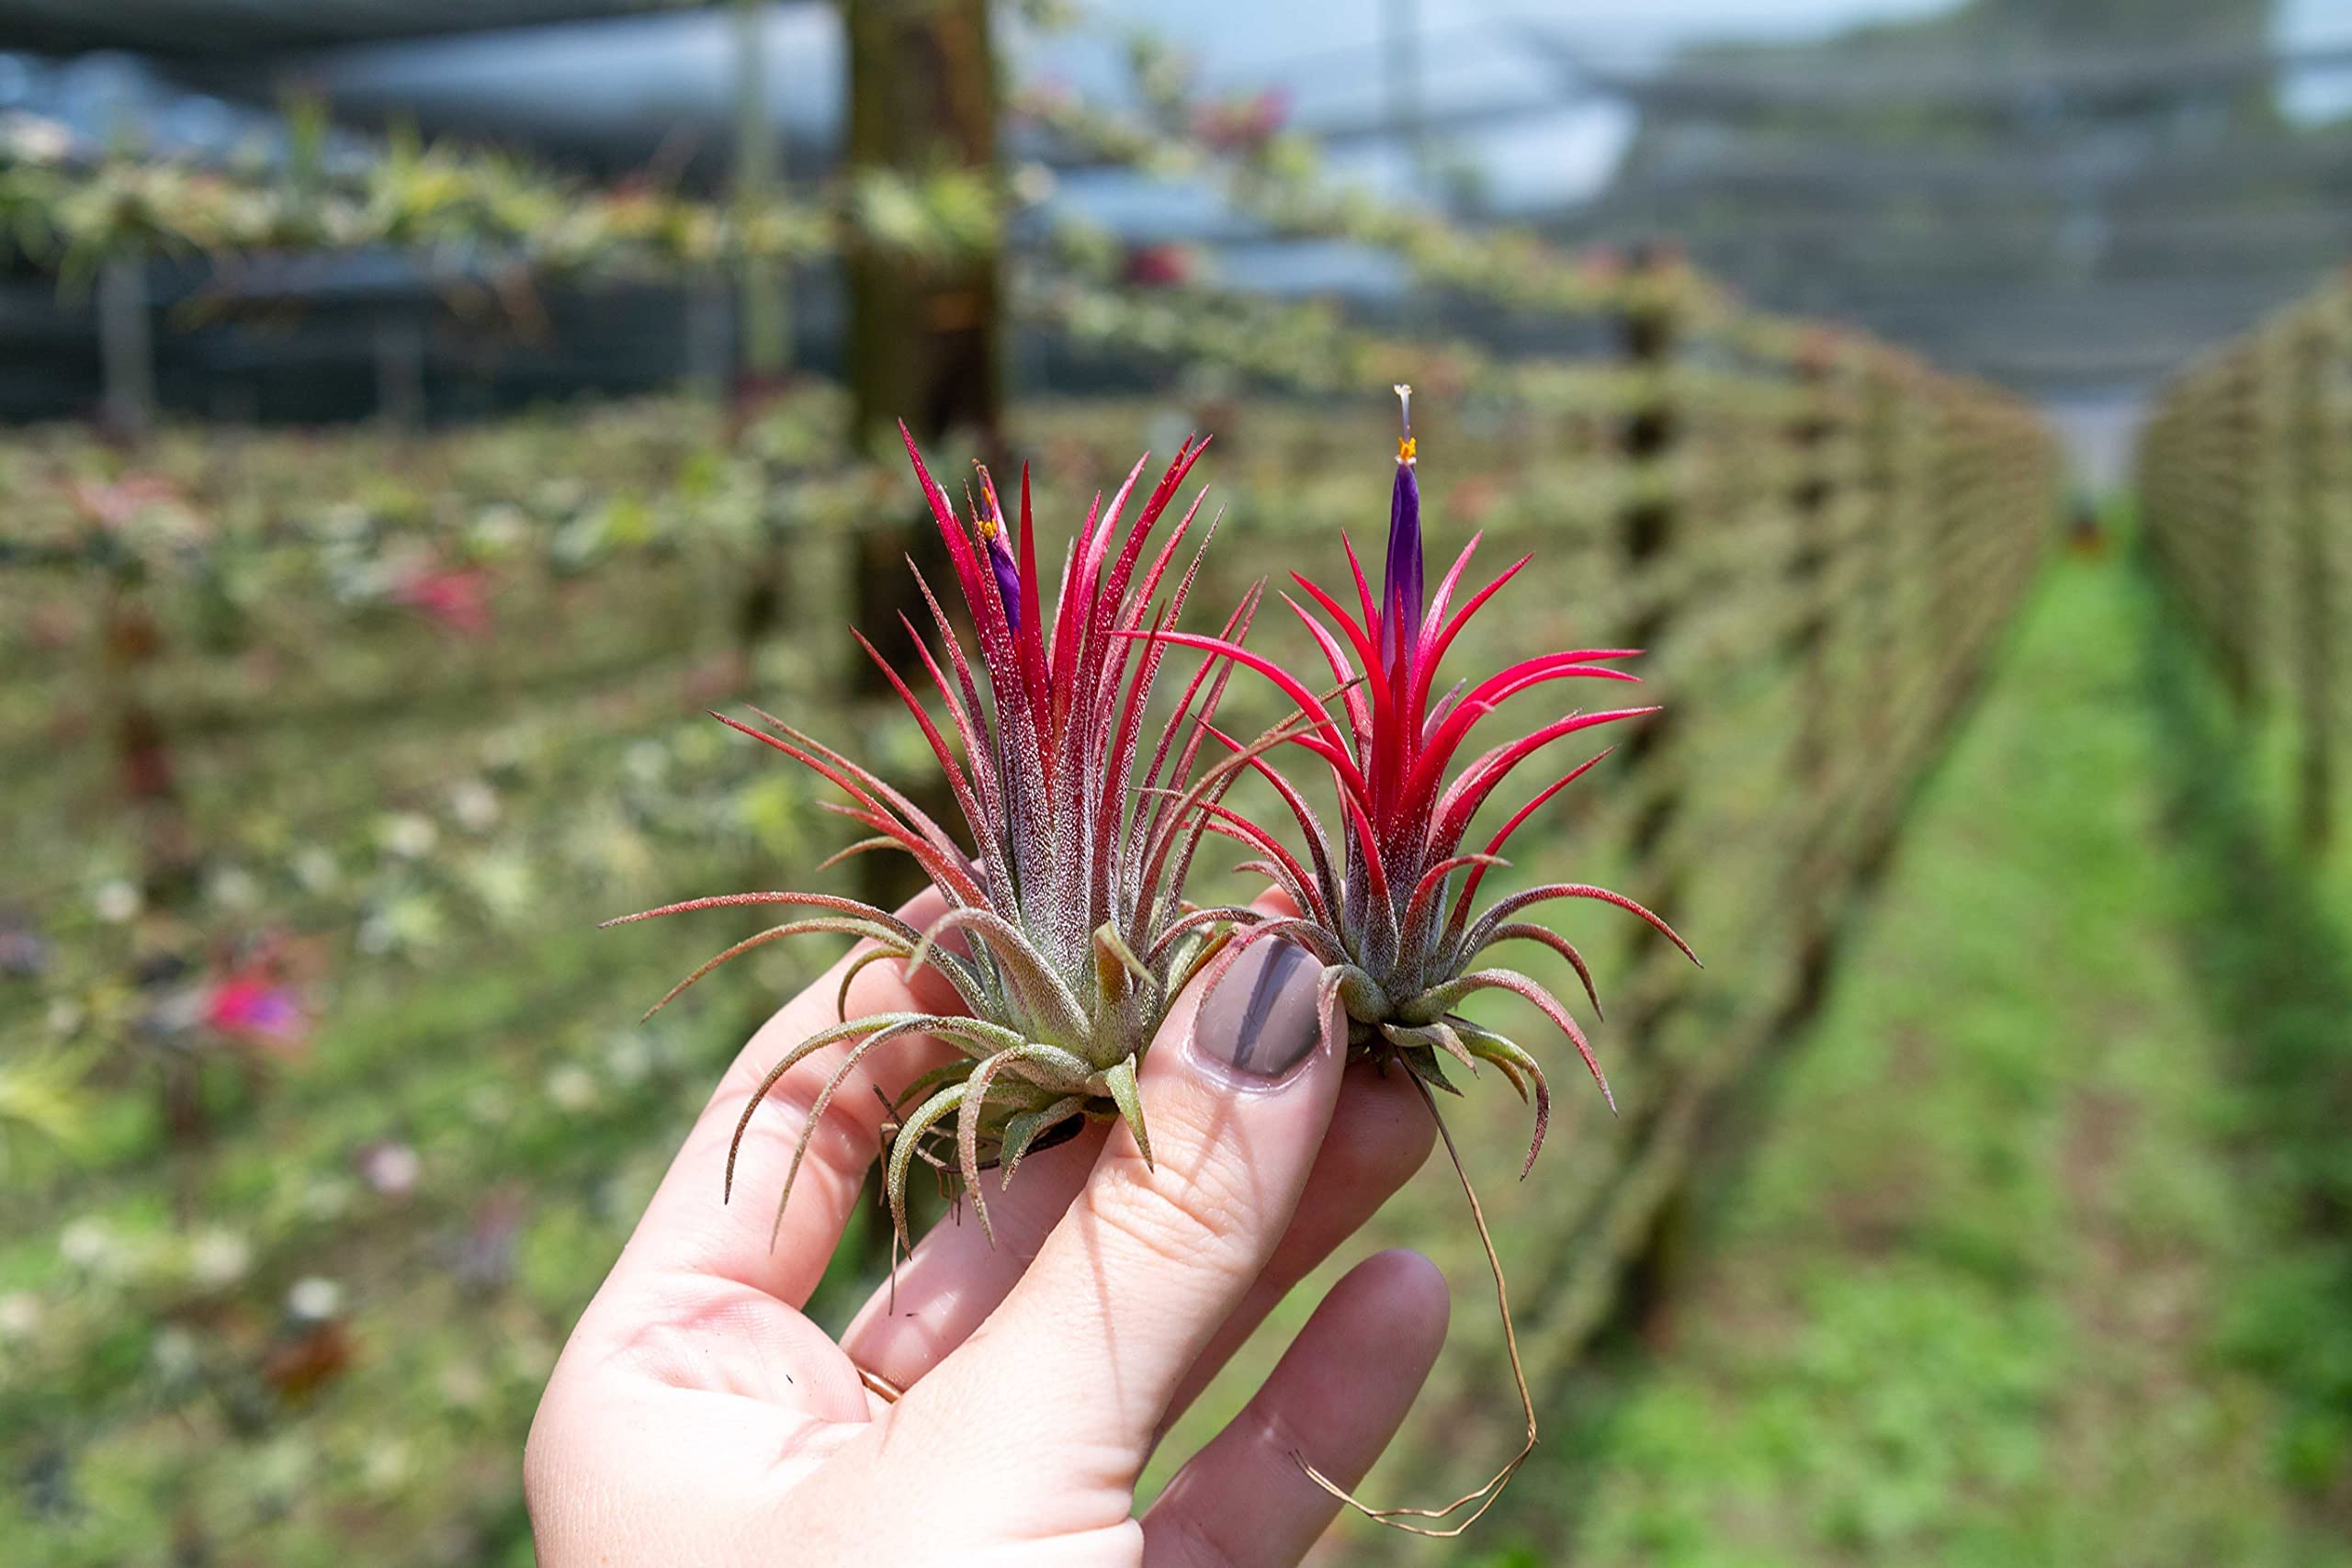 5 Pack Ionantha Air Plants Live Tillandsia Succulent Air Plant - Available in Wholesale and Bulk - Home and Garden Decor - Easy Care Indoor and Outdoor Plants Holders